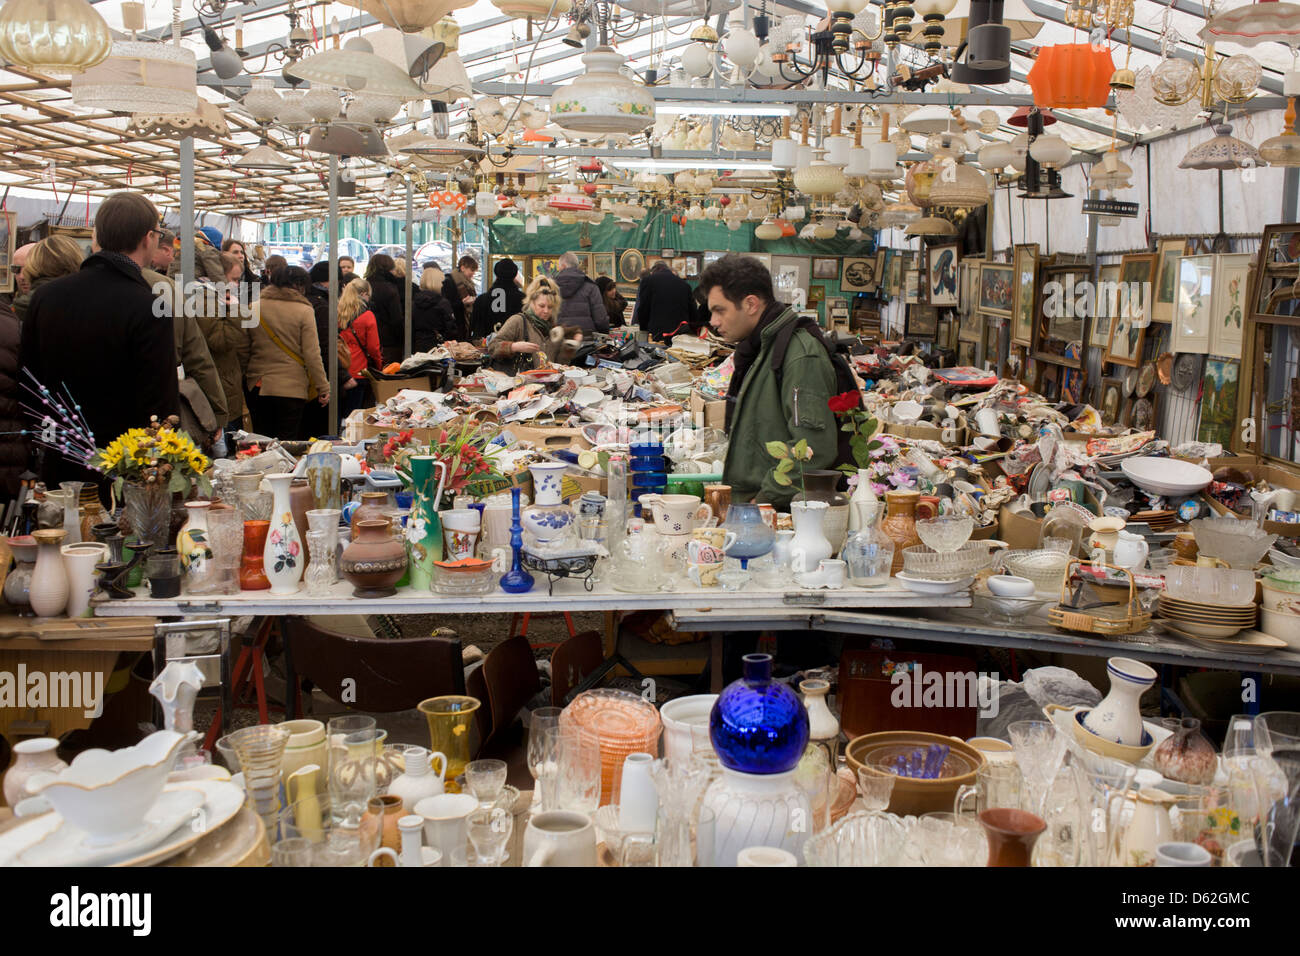 Glassware, crockery, bric-a-brac and old possessions being sold at a giant market in Mauerpark - an open space on the site of the old Berlin wall, the former border between Communist East and West Berlin during the Cold War. Stock Photo